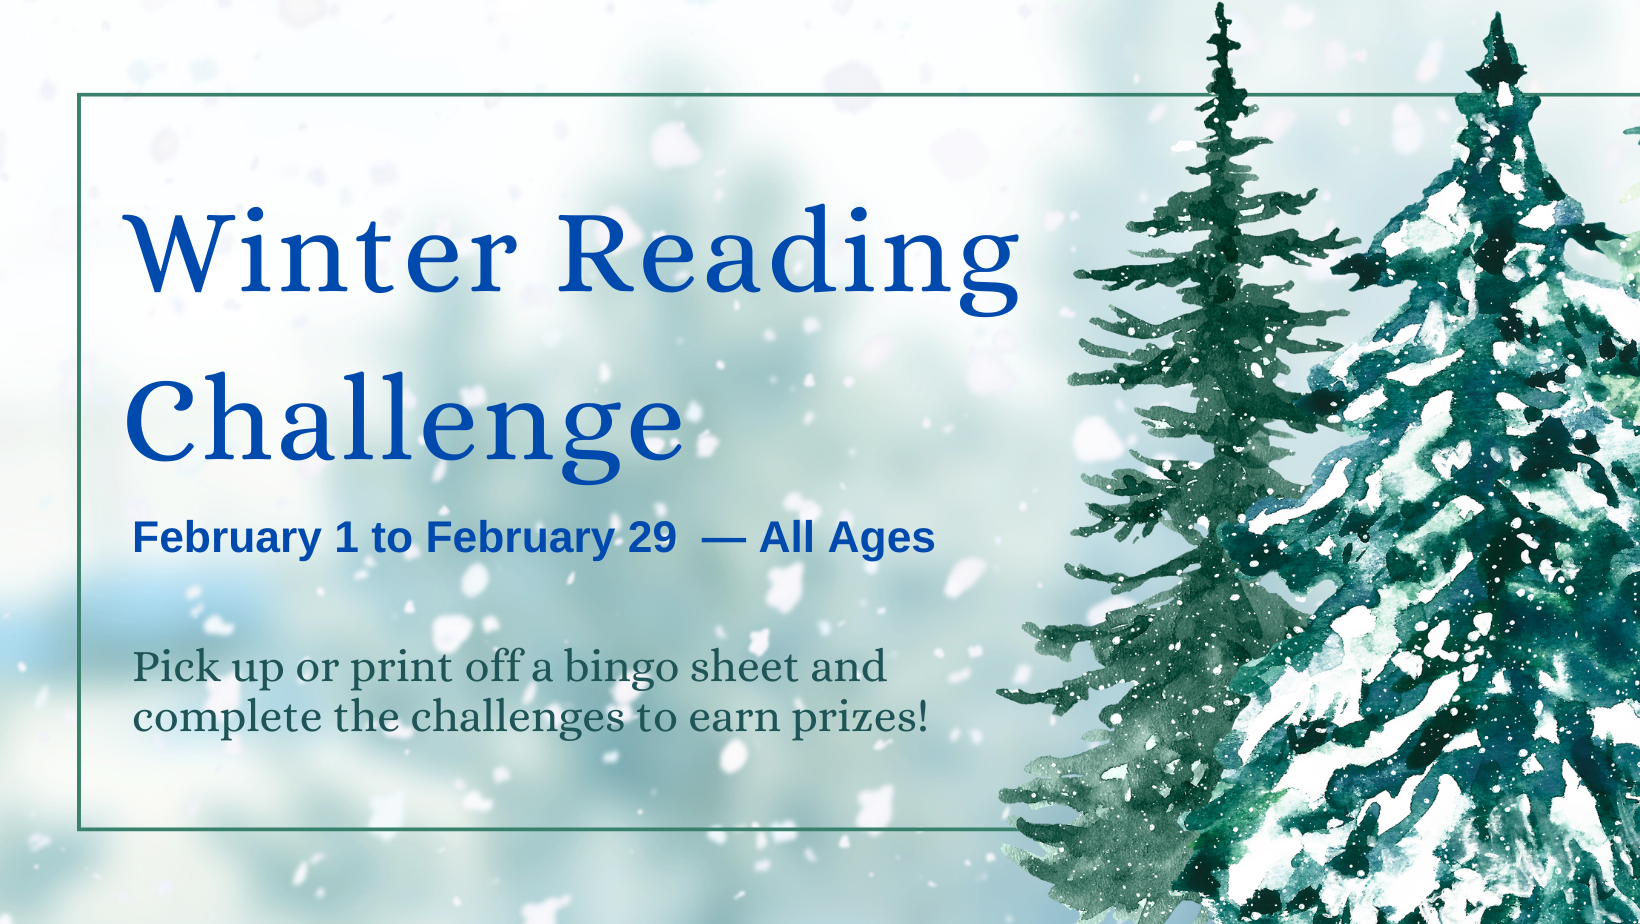 Library winter reading challenge banner on a snowy background with trees